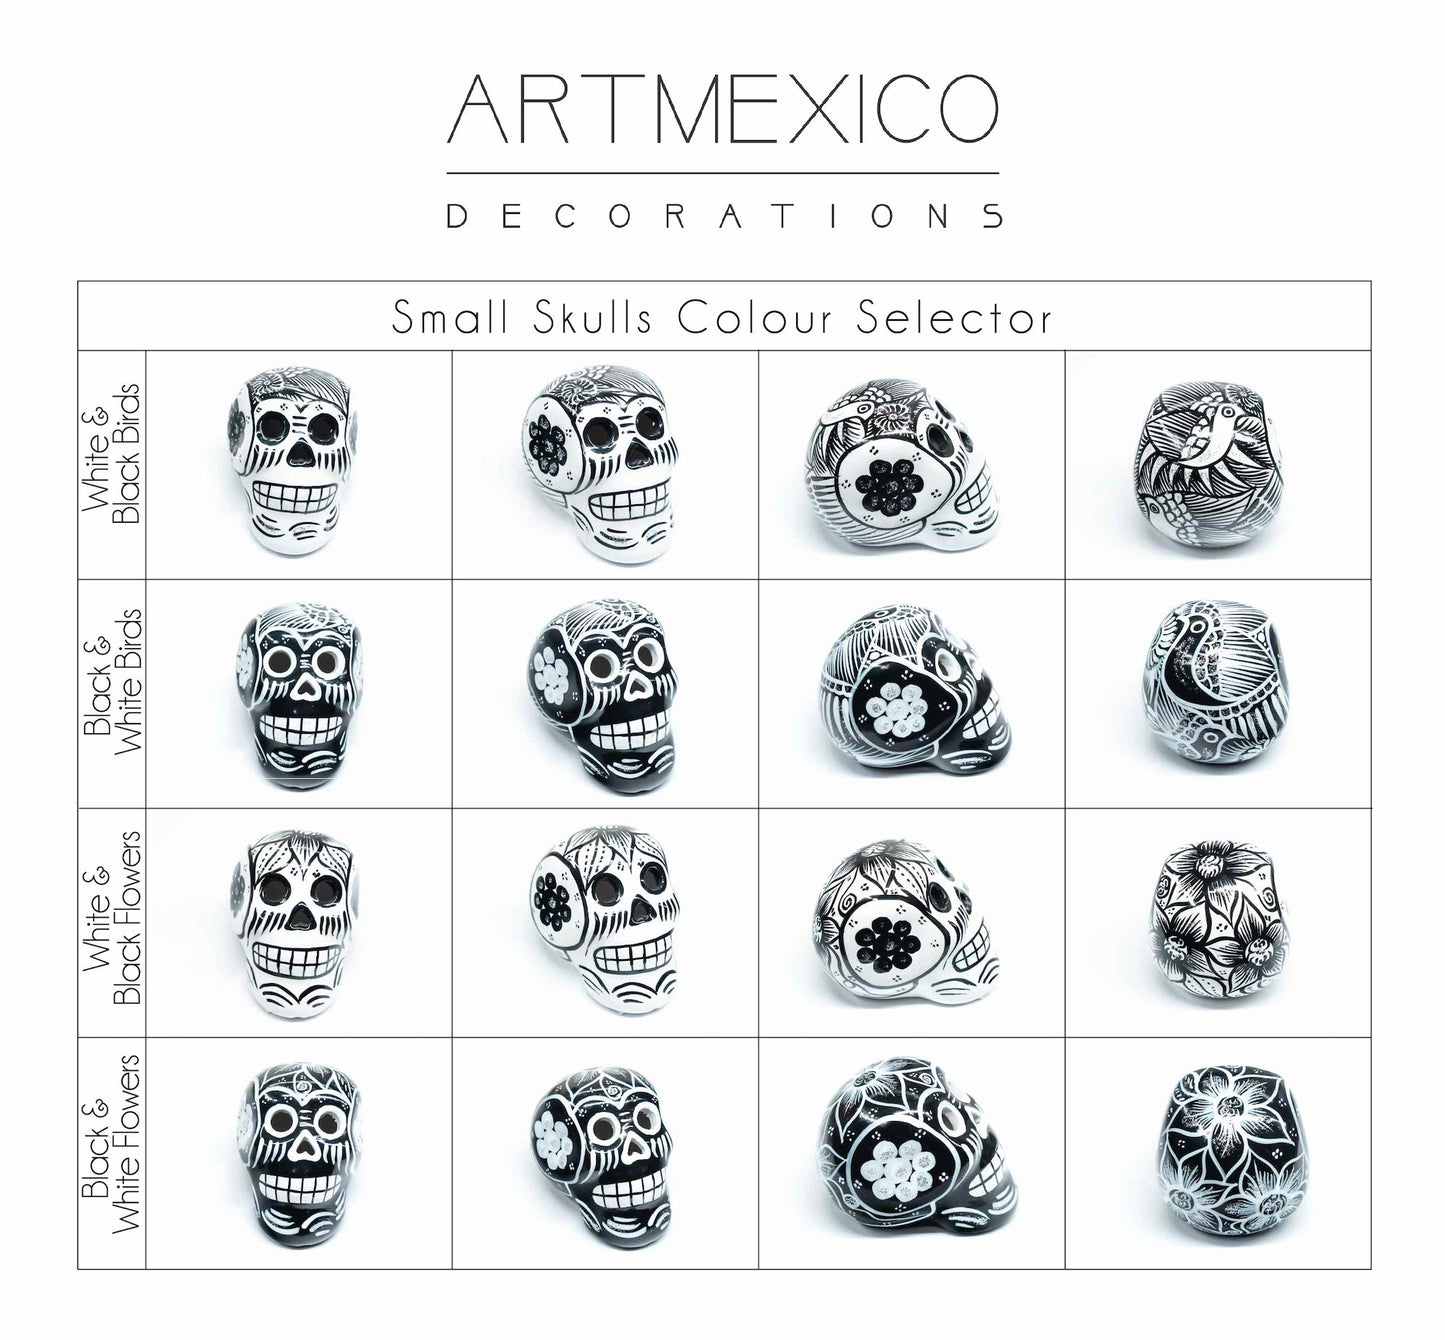 60 Small Mexican Ceramic Skulls Wholesale, Day of the Dead Decorations, Individually Boxed